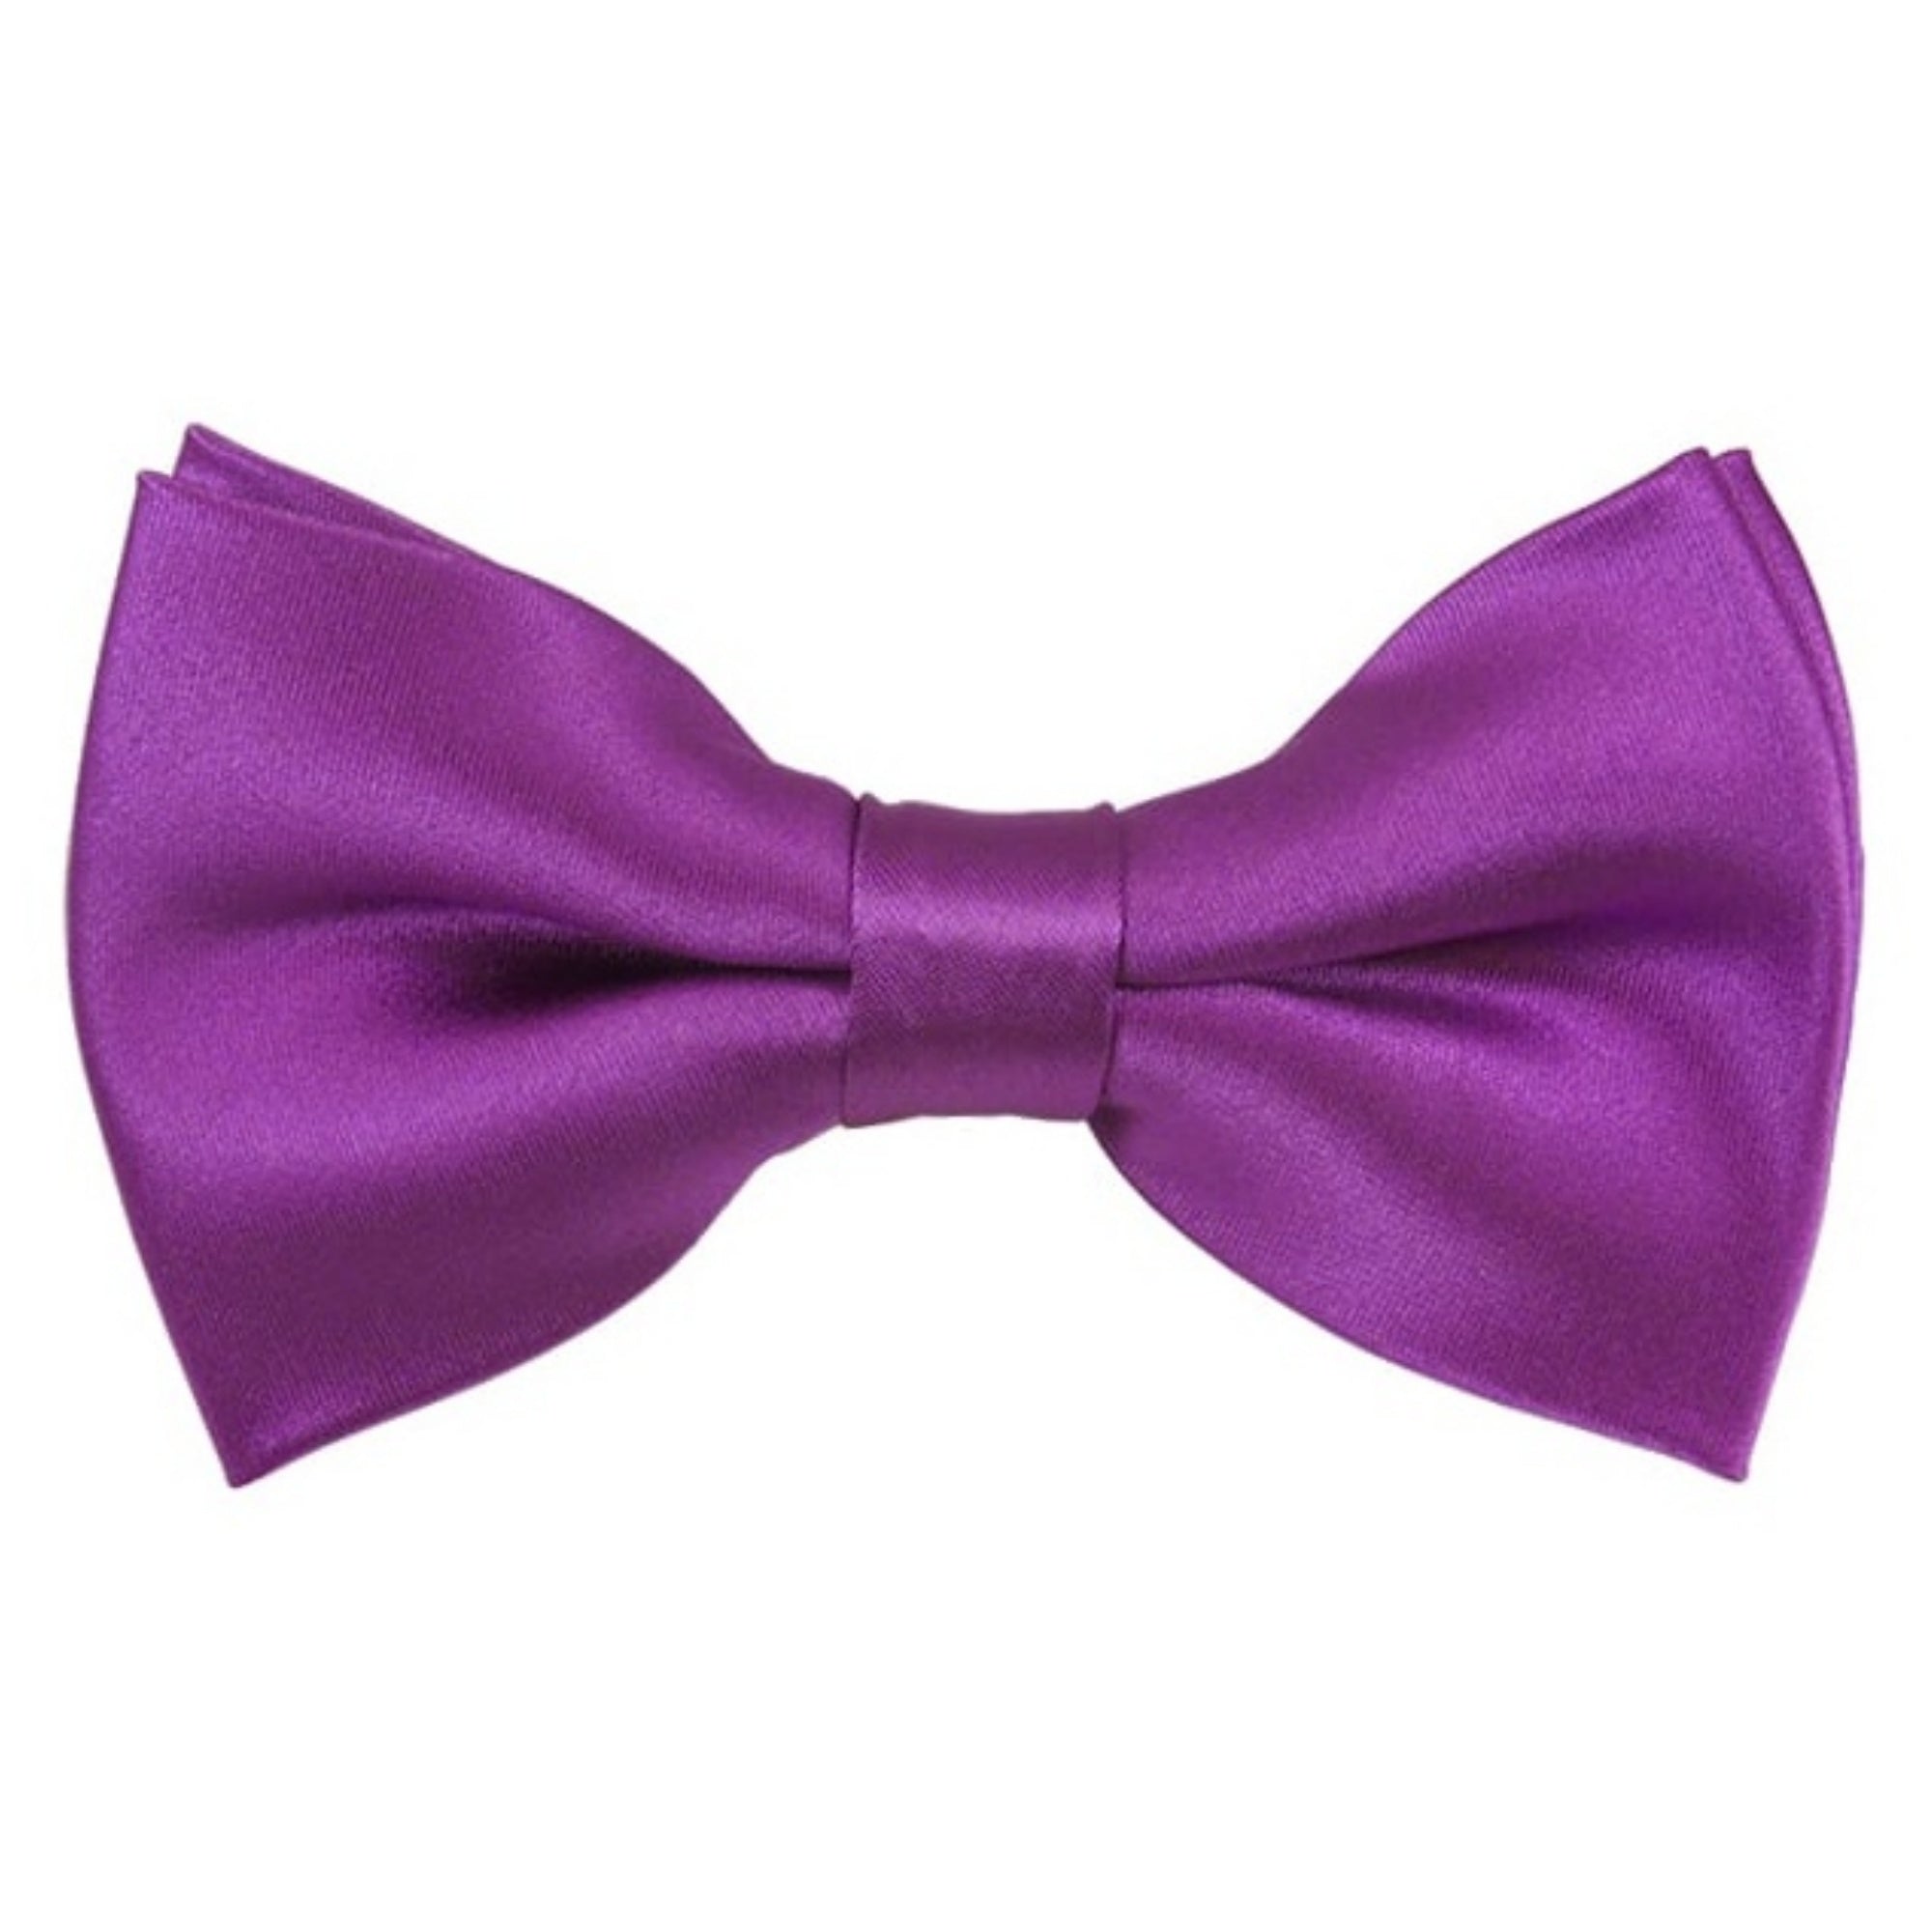 TheDapperTie Men's Solid Color 2.5 W And 4.5 L Inch Pre-Tied adjustable Bow Ties Men's Solid Color Bow Tie TheDapperTie Plum Violet  